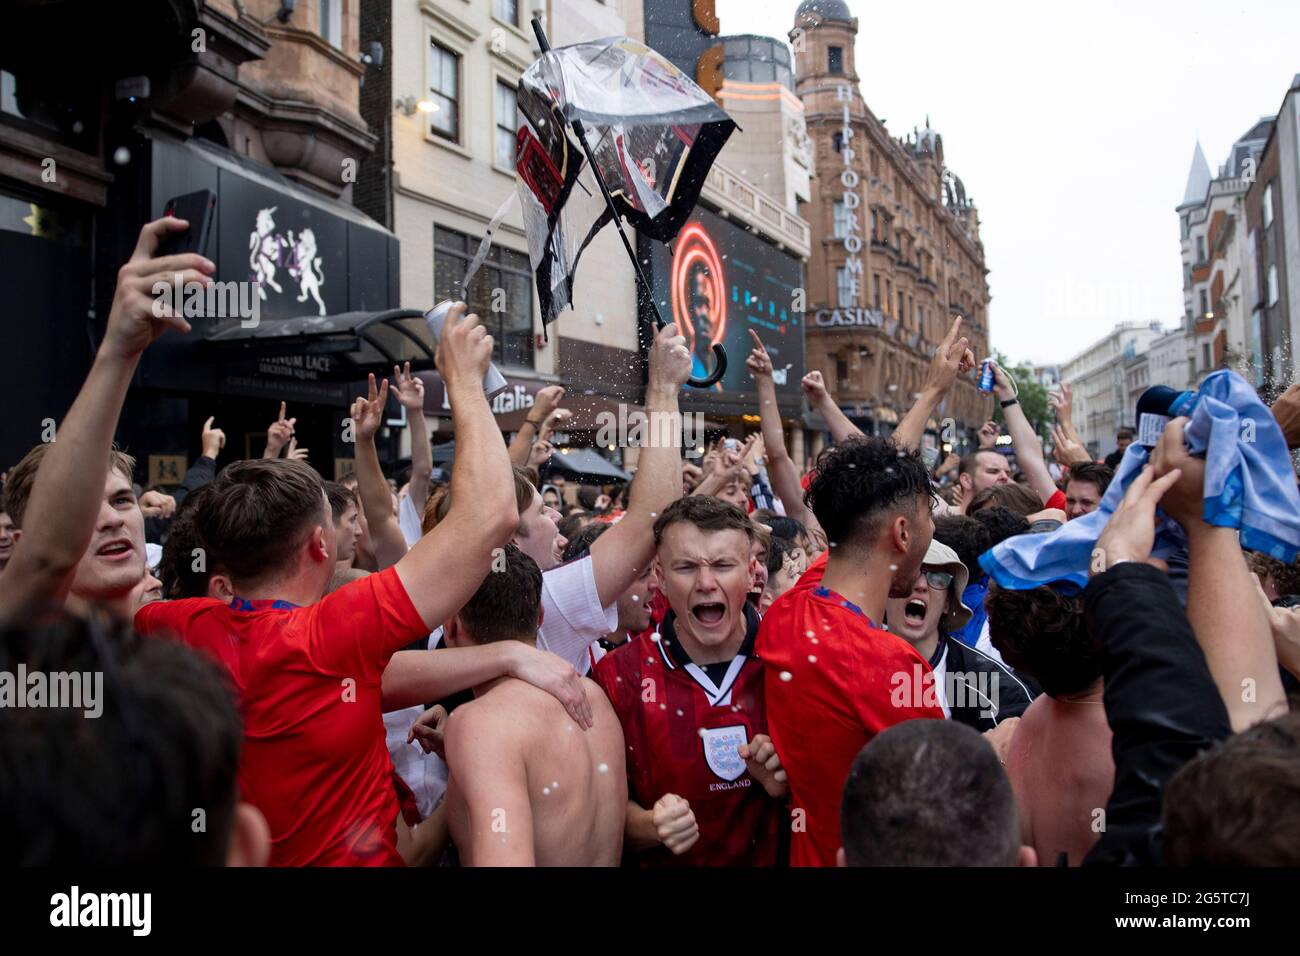 London, UK. 29th June, 2021. Crowd of football fans celebrate the win.  Hundreds of England football fans gather and celebrate the win of 2:0 over  Germany in the round of 16 of